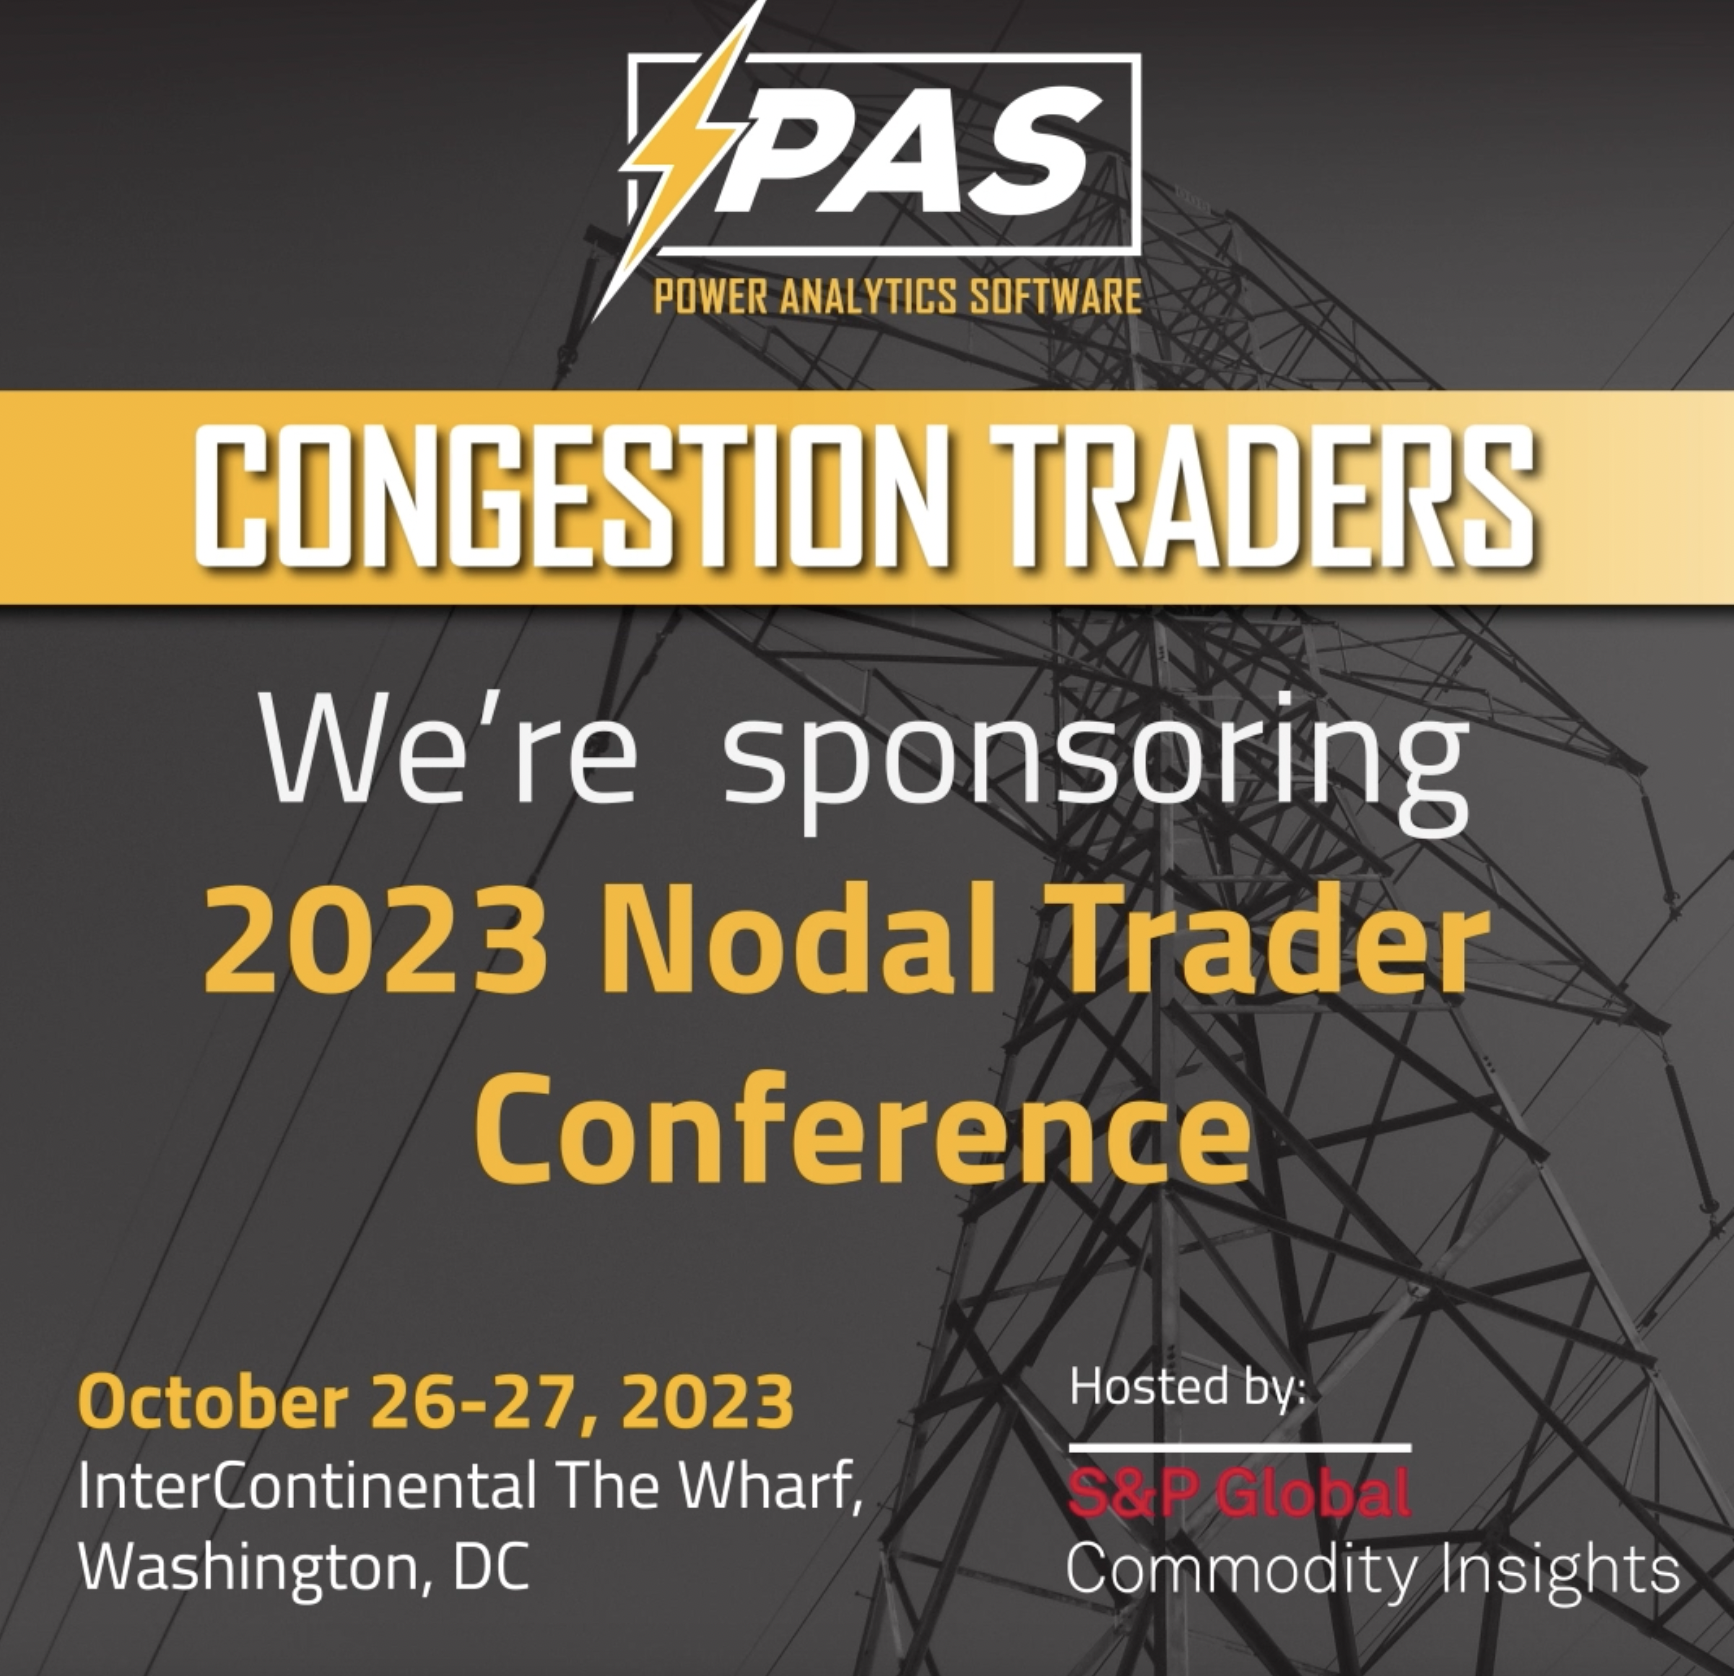 Power Analytics Software is a proud sponsor of Nodal Trader Conference 2023 in Washington DC